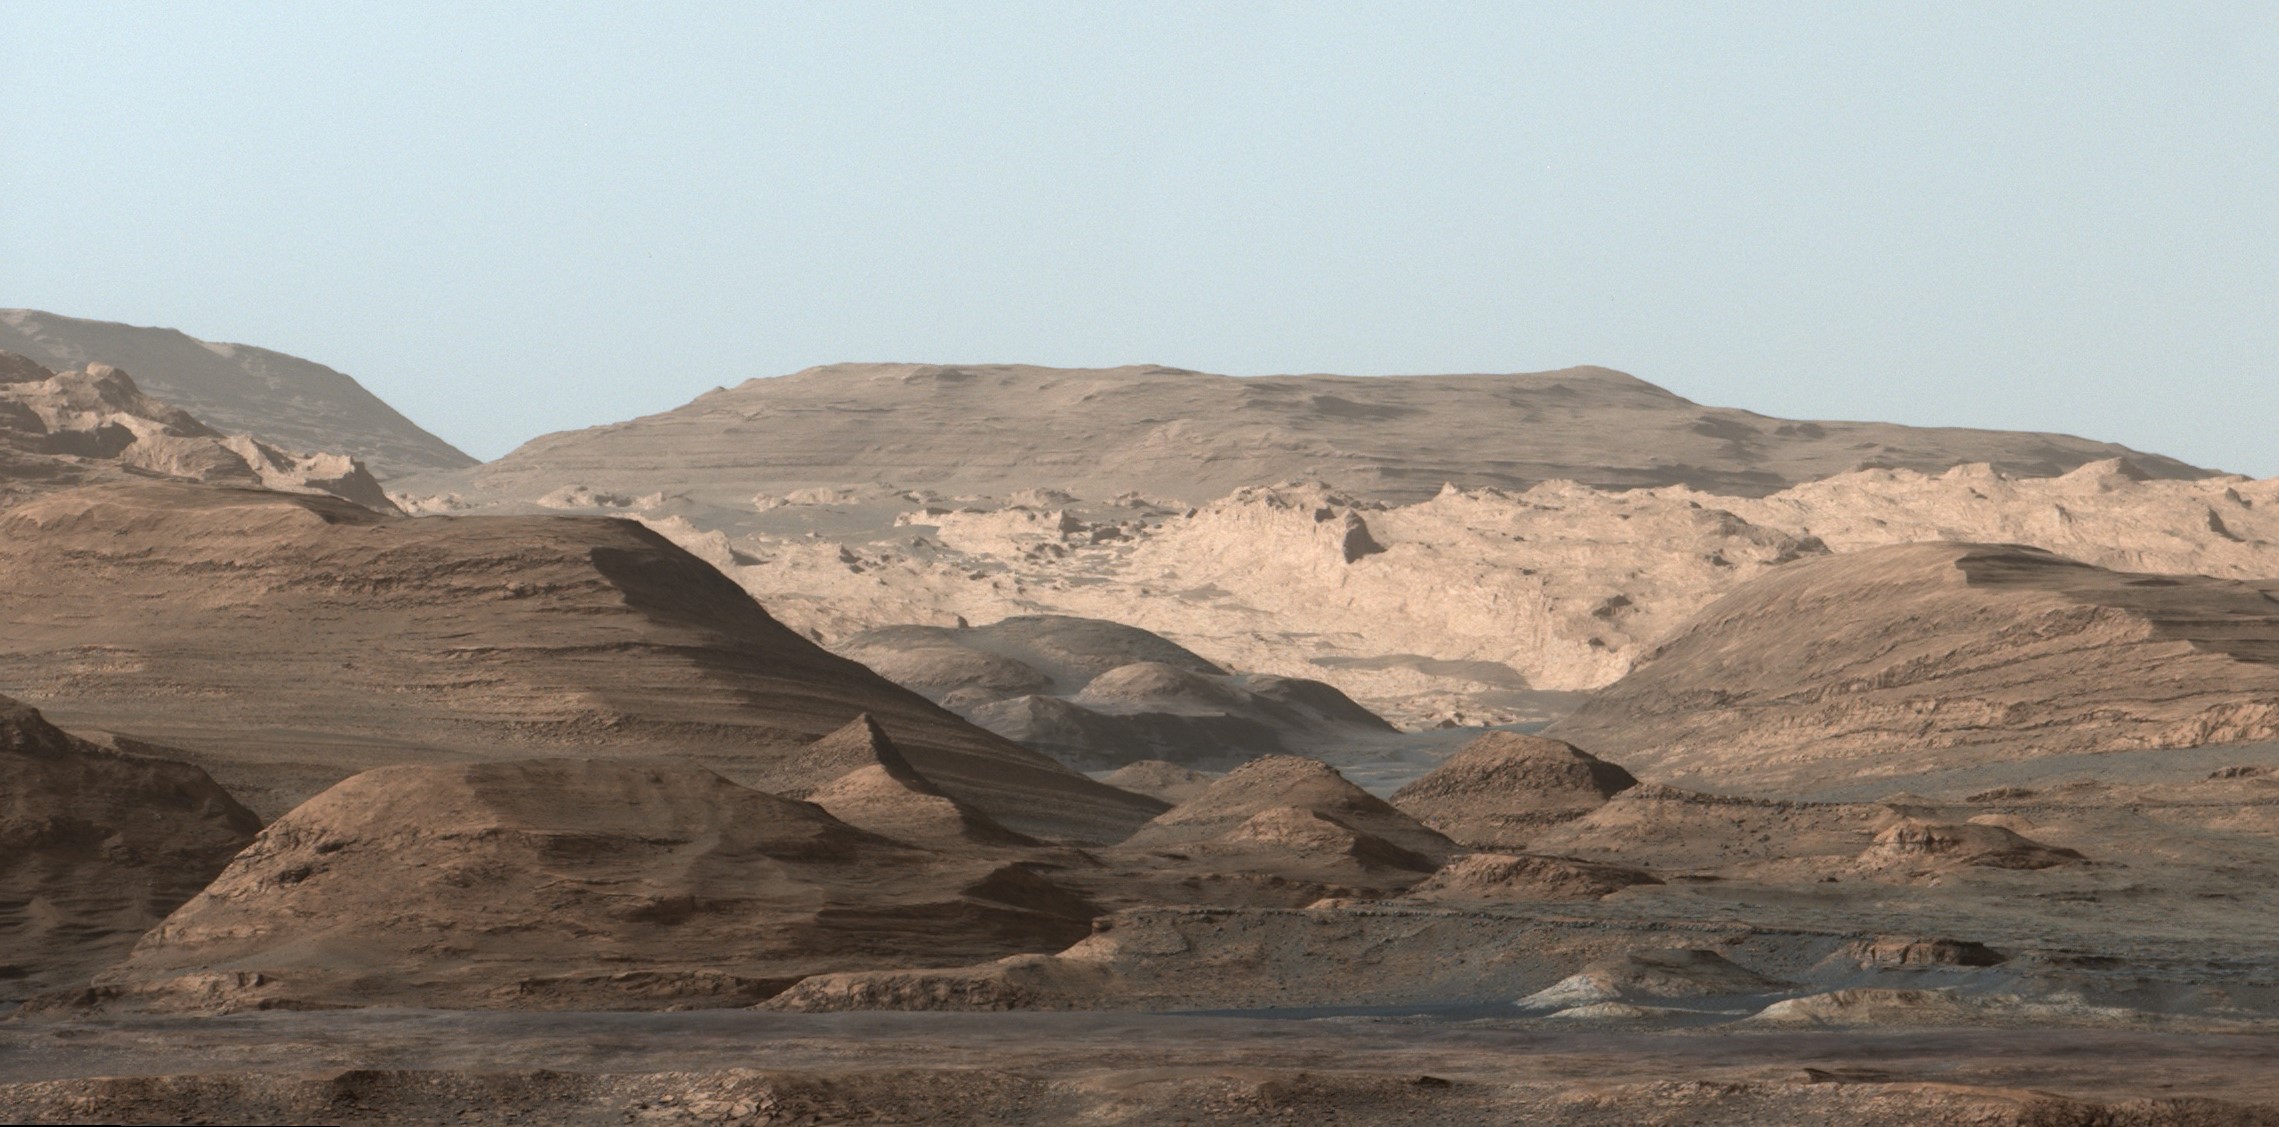 38884_mars-msl-gale-crater-mt-sharp-soil-layers-pia19912.jpg